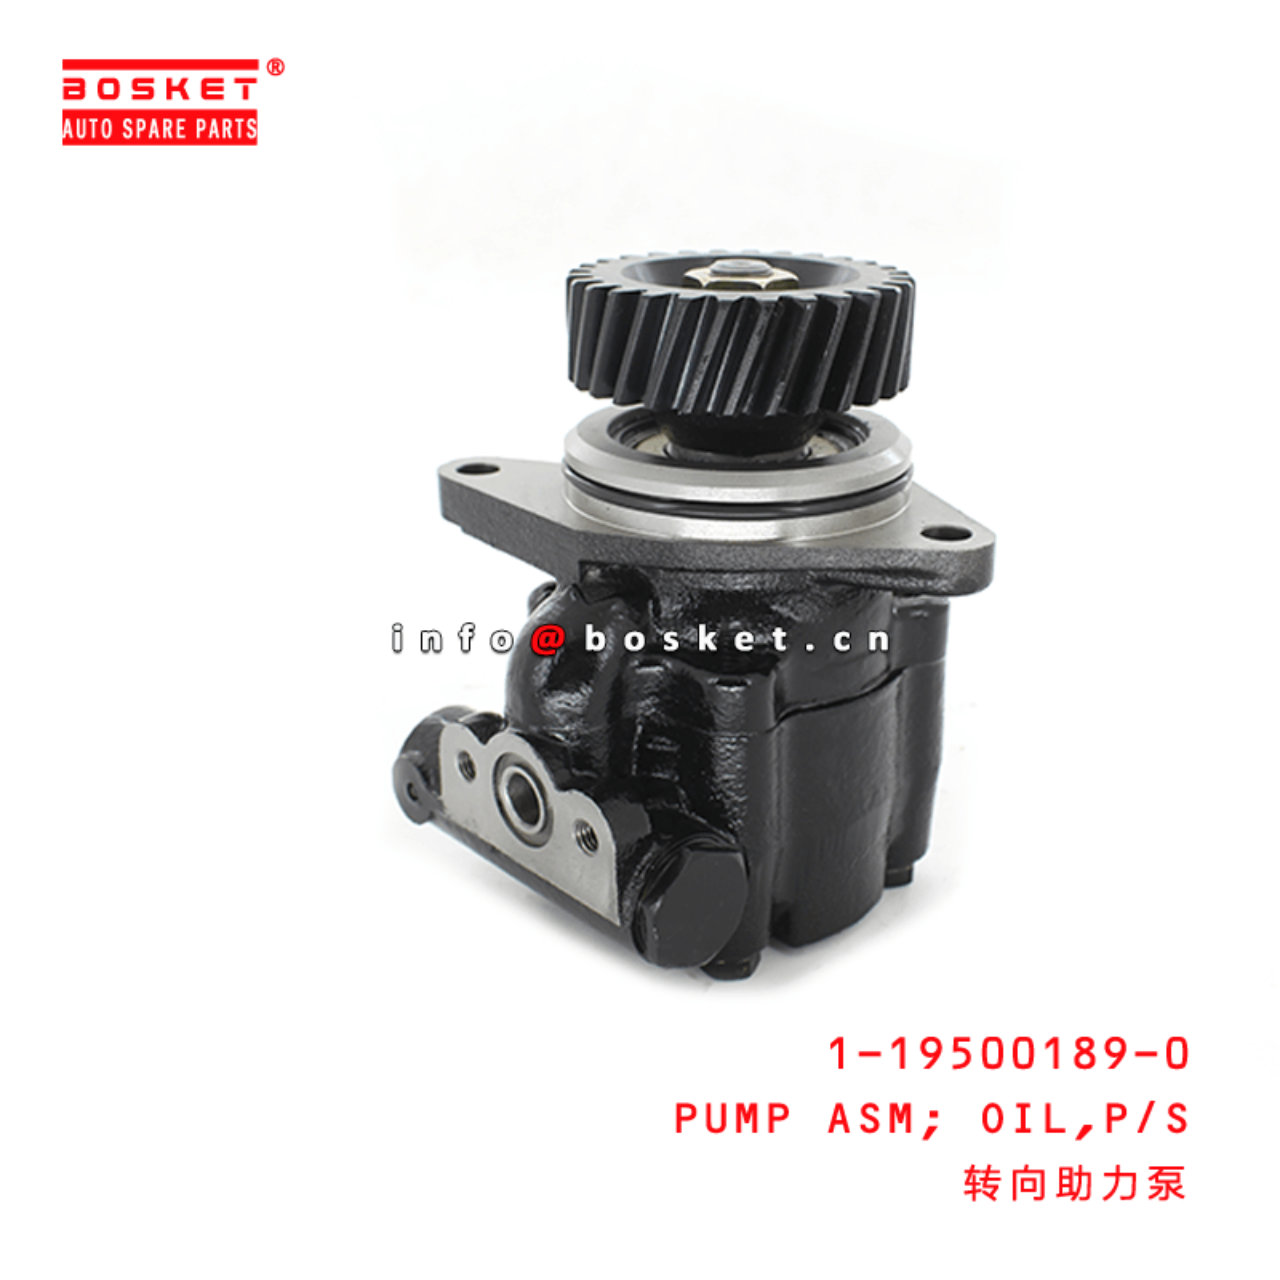 1-19500189-0 Power Steering Oil Pump Assembly Suitable for ISUZU SBSCSD 6BD1 1195001890